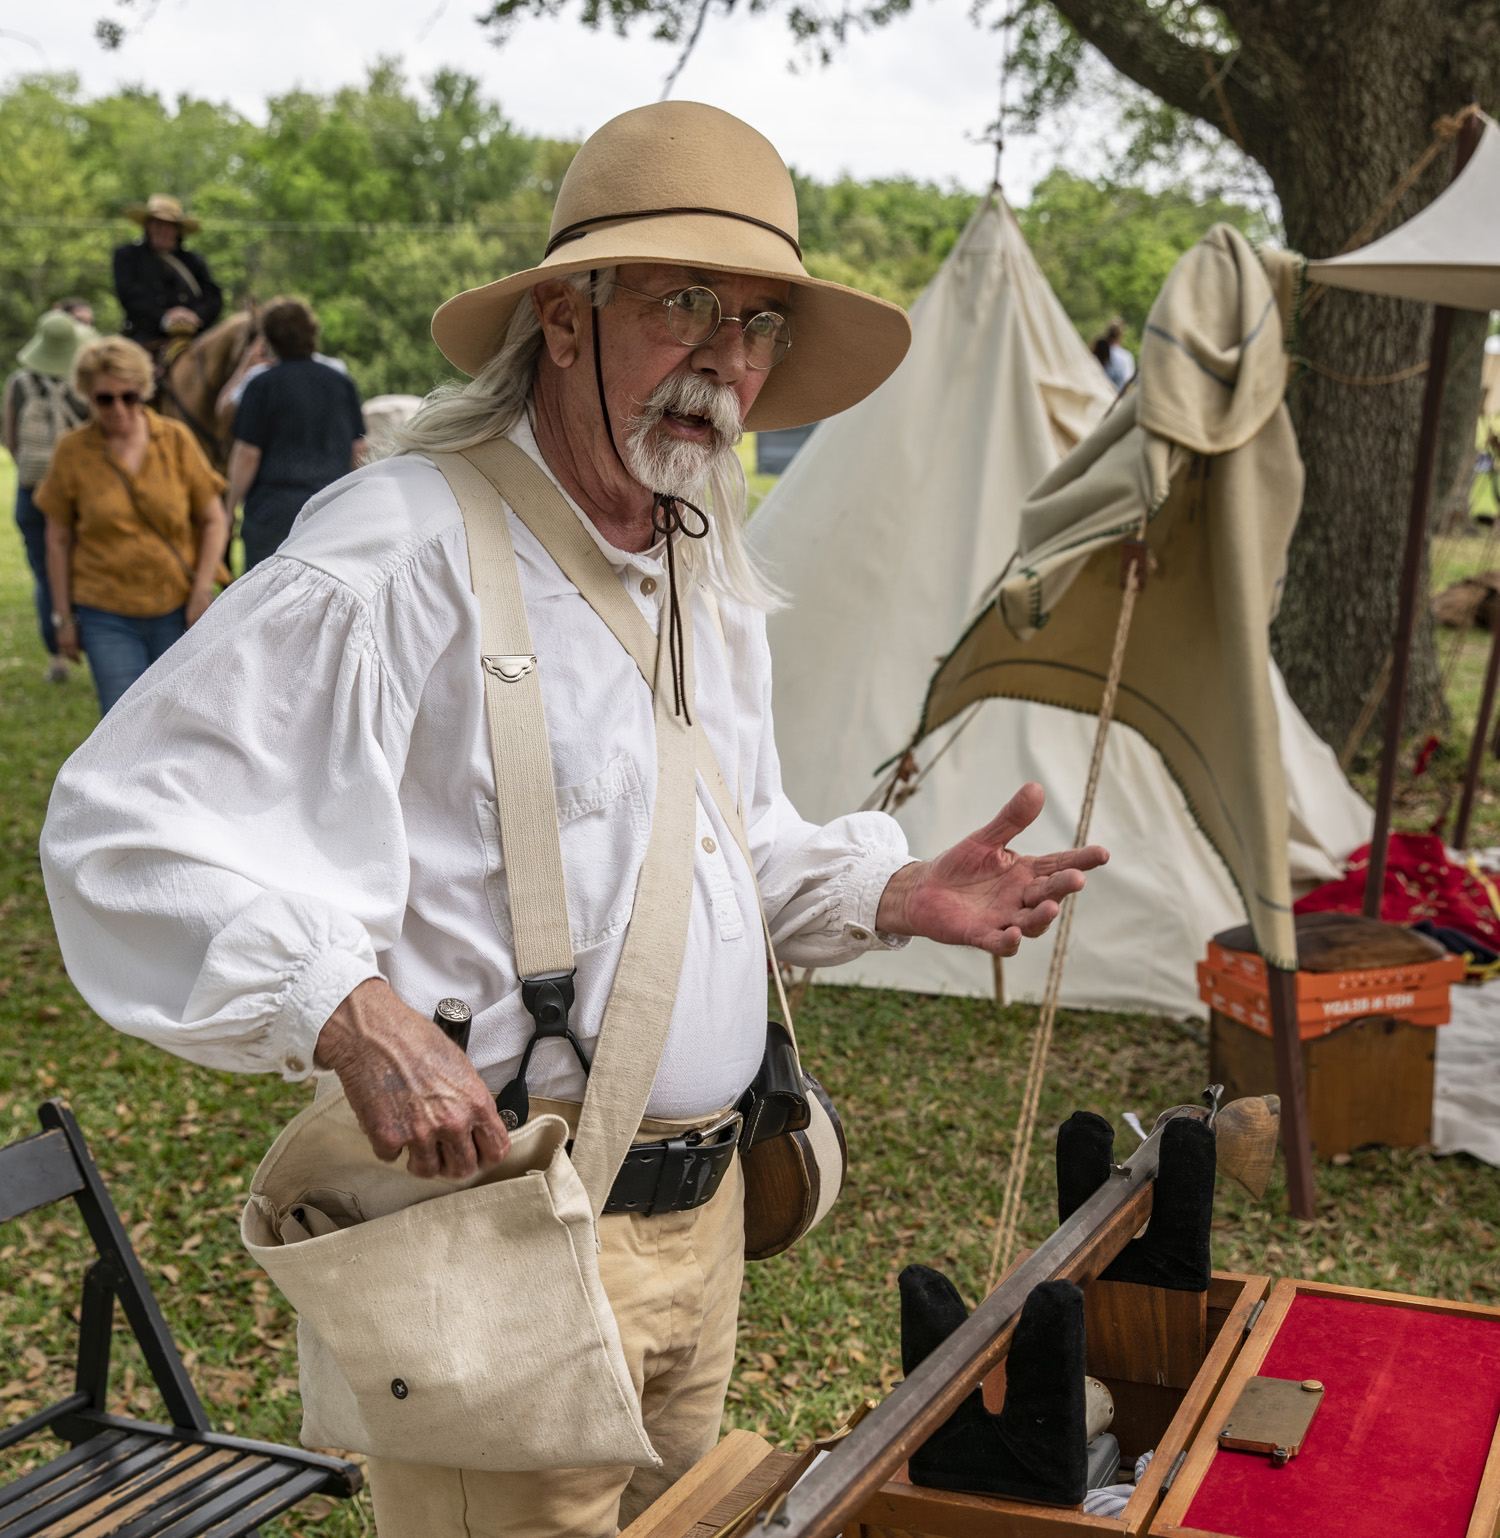 A reenactor reaches into a canvas bag hanging over his shoulder while gesturing with his other hand.